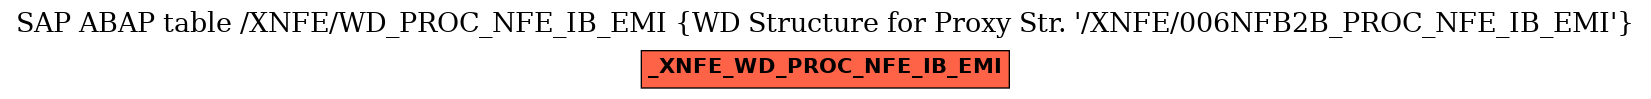 E-R Diagram for table /XNFE/WD_PROC_NFE_IB_EMI (WD Structure for Proxy Str. 